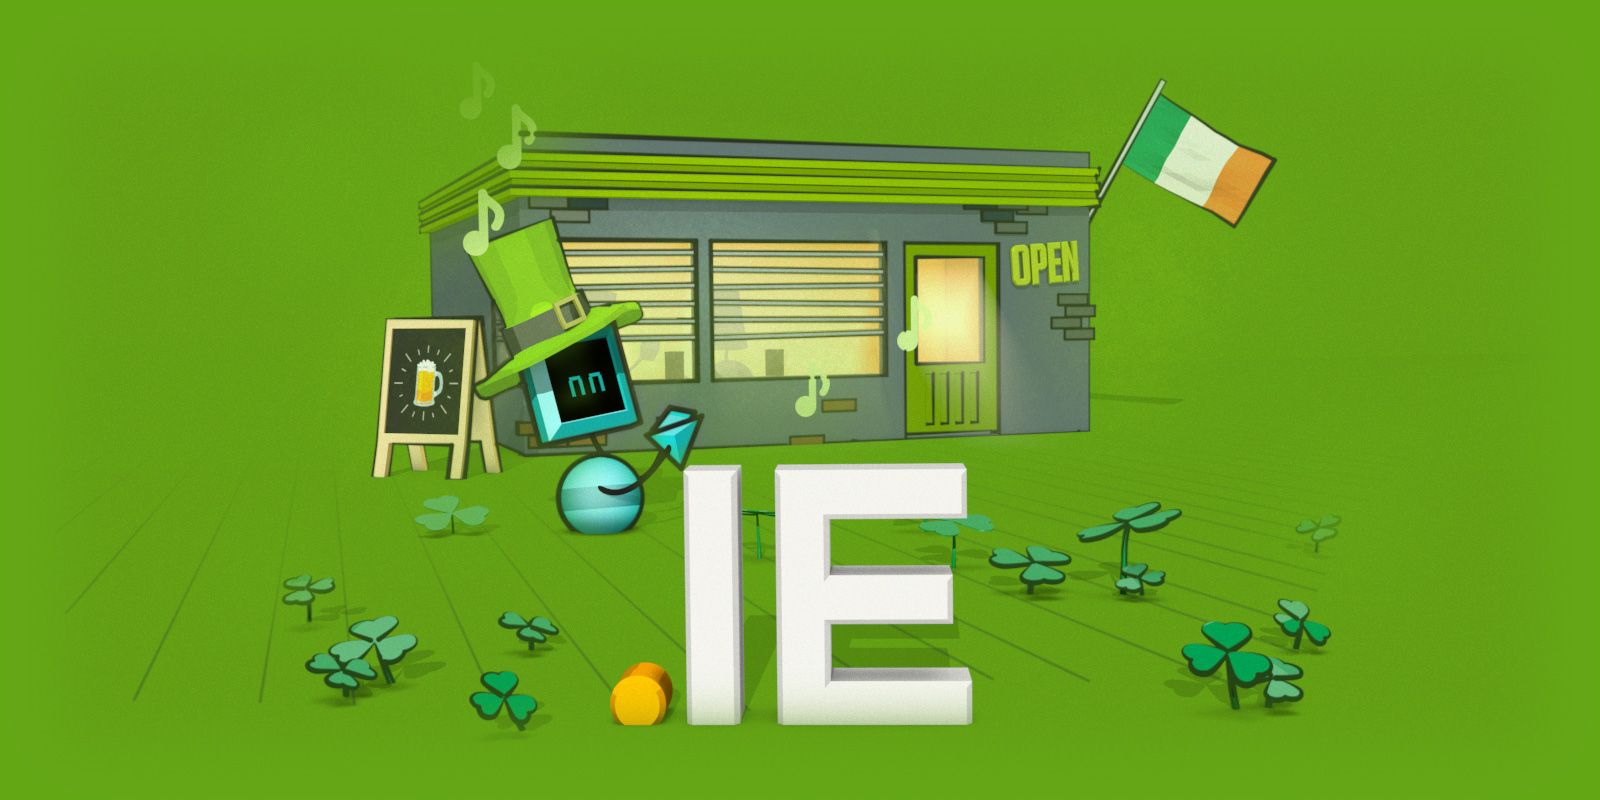 New rules for registering a .ie domain